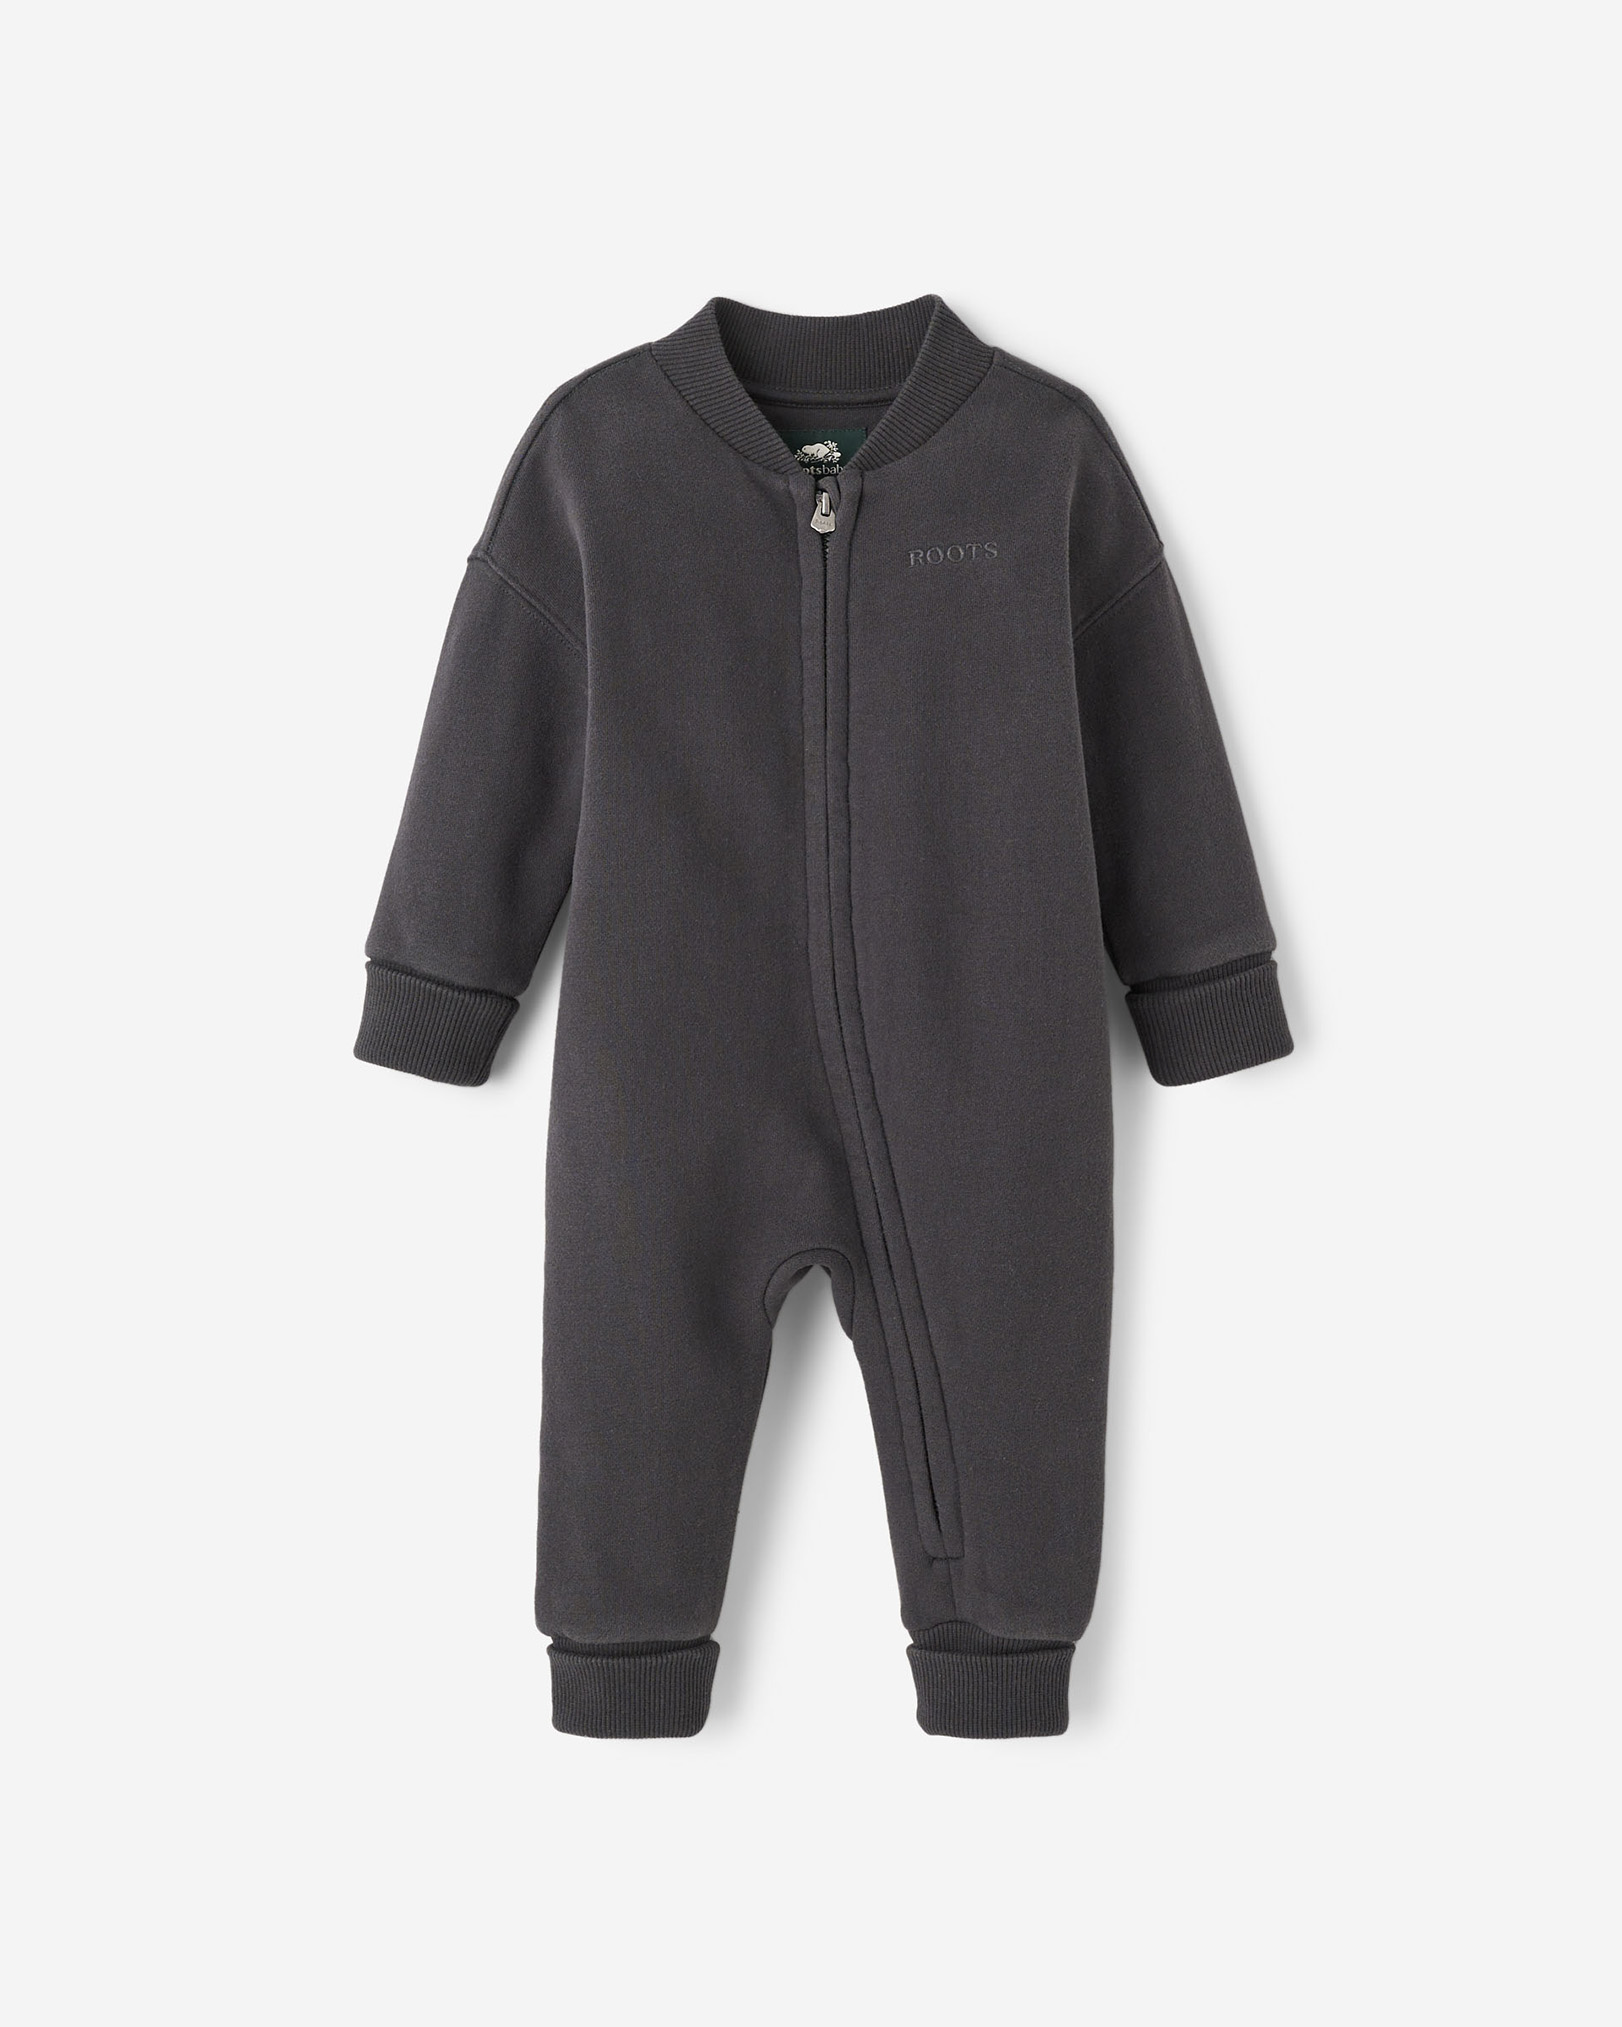 Roots Baby One Romper in Graphite